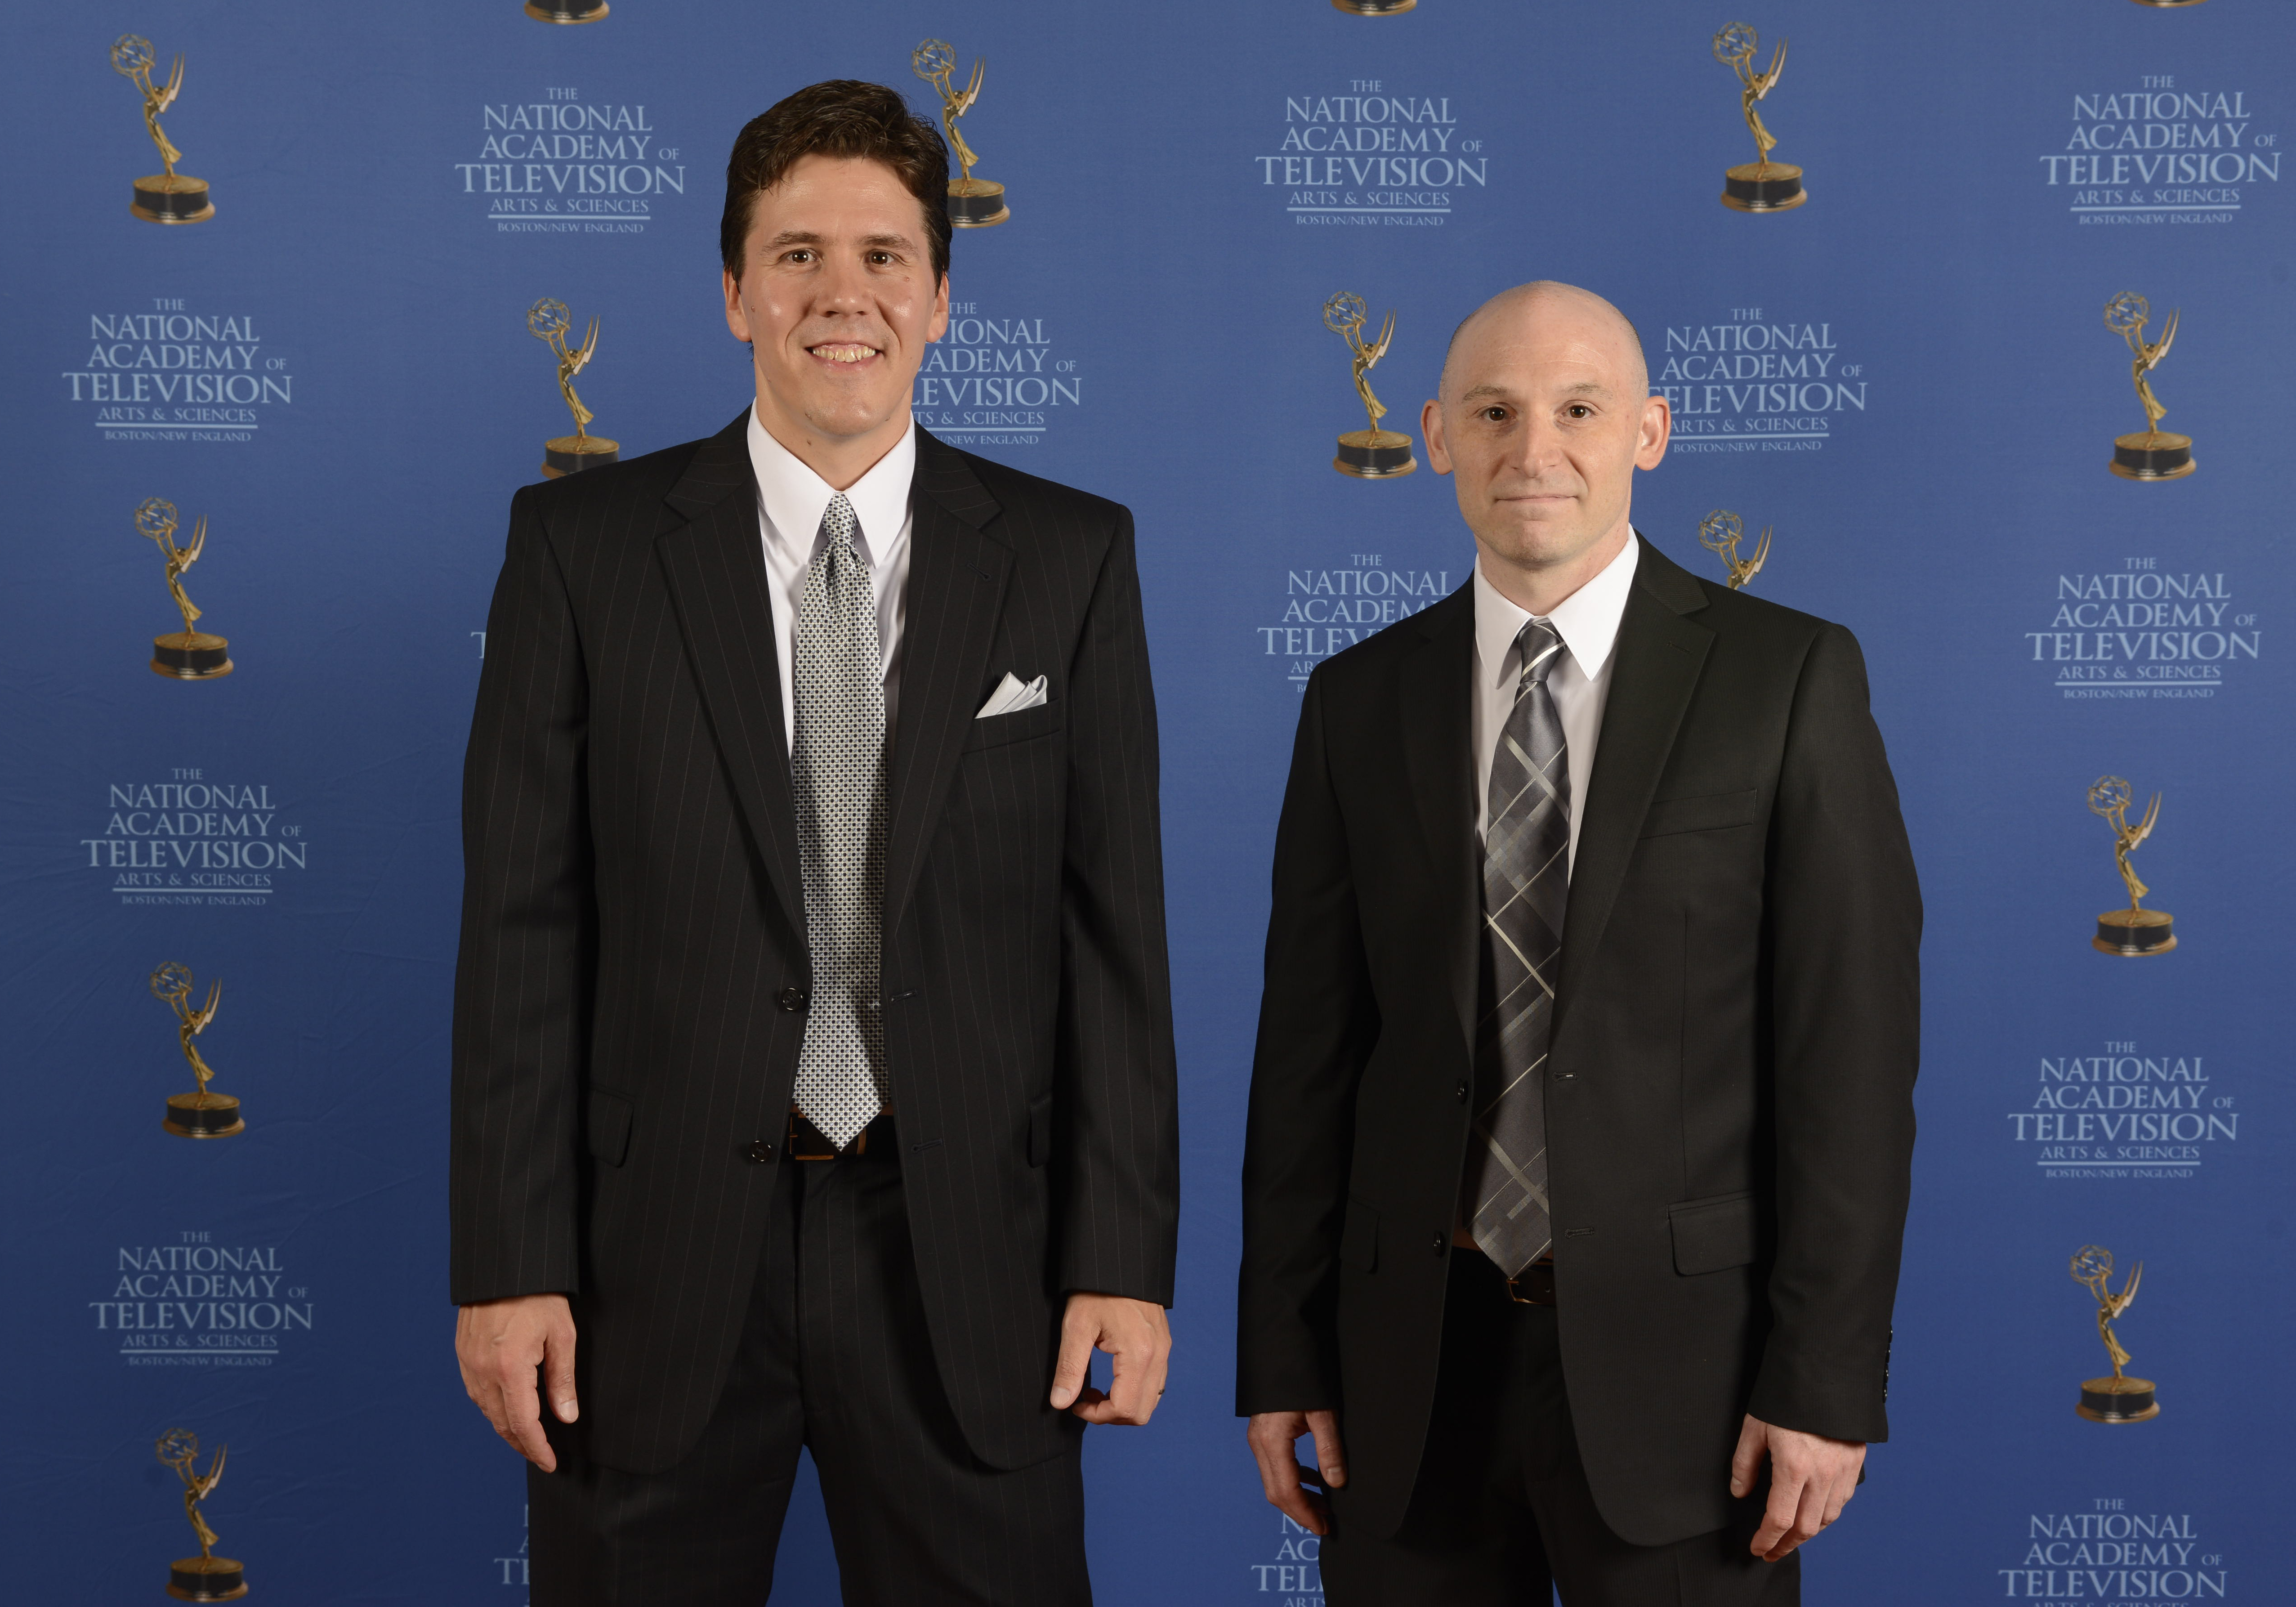 At the 2014 Emmy Awards. New England Legends was nominated under the category of Magazine Program/Special. With Tony Dunne